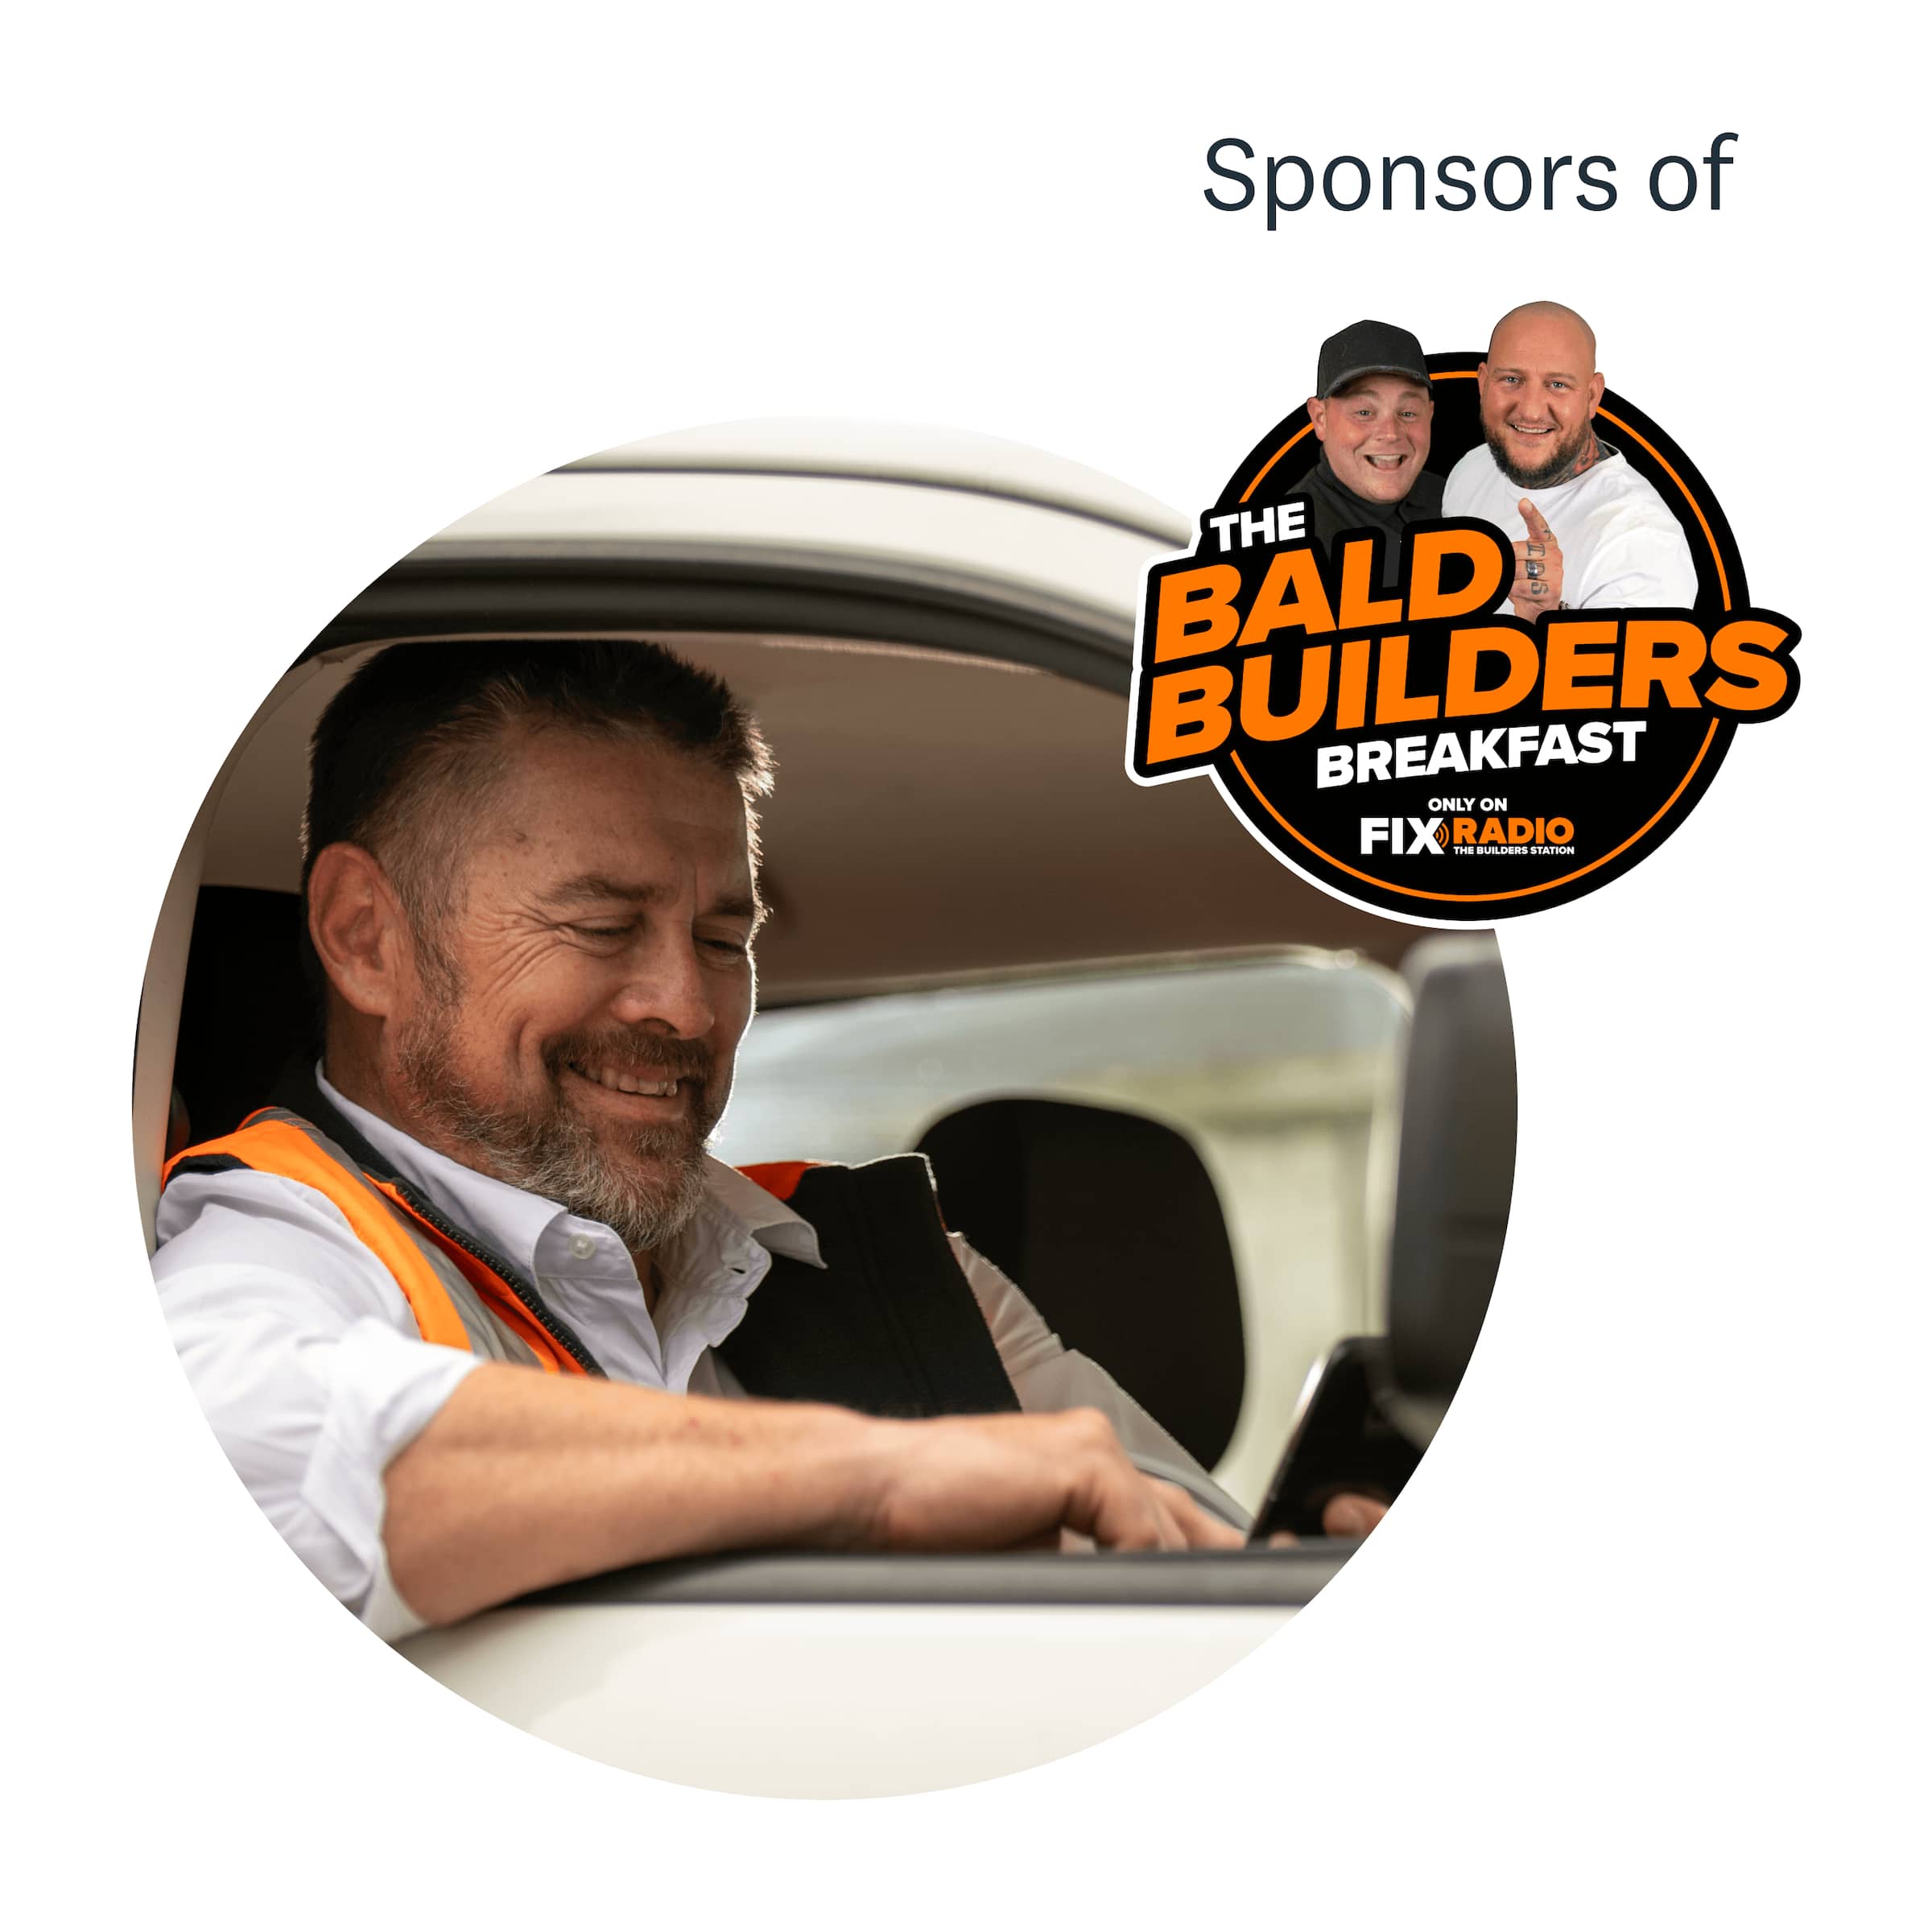 A picture of the hosts of The Fix radio station and a tradie driving a car